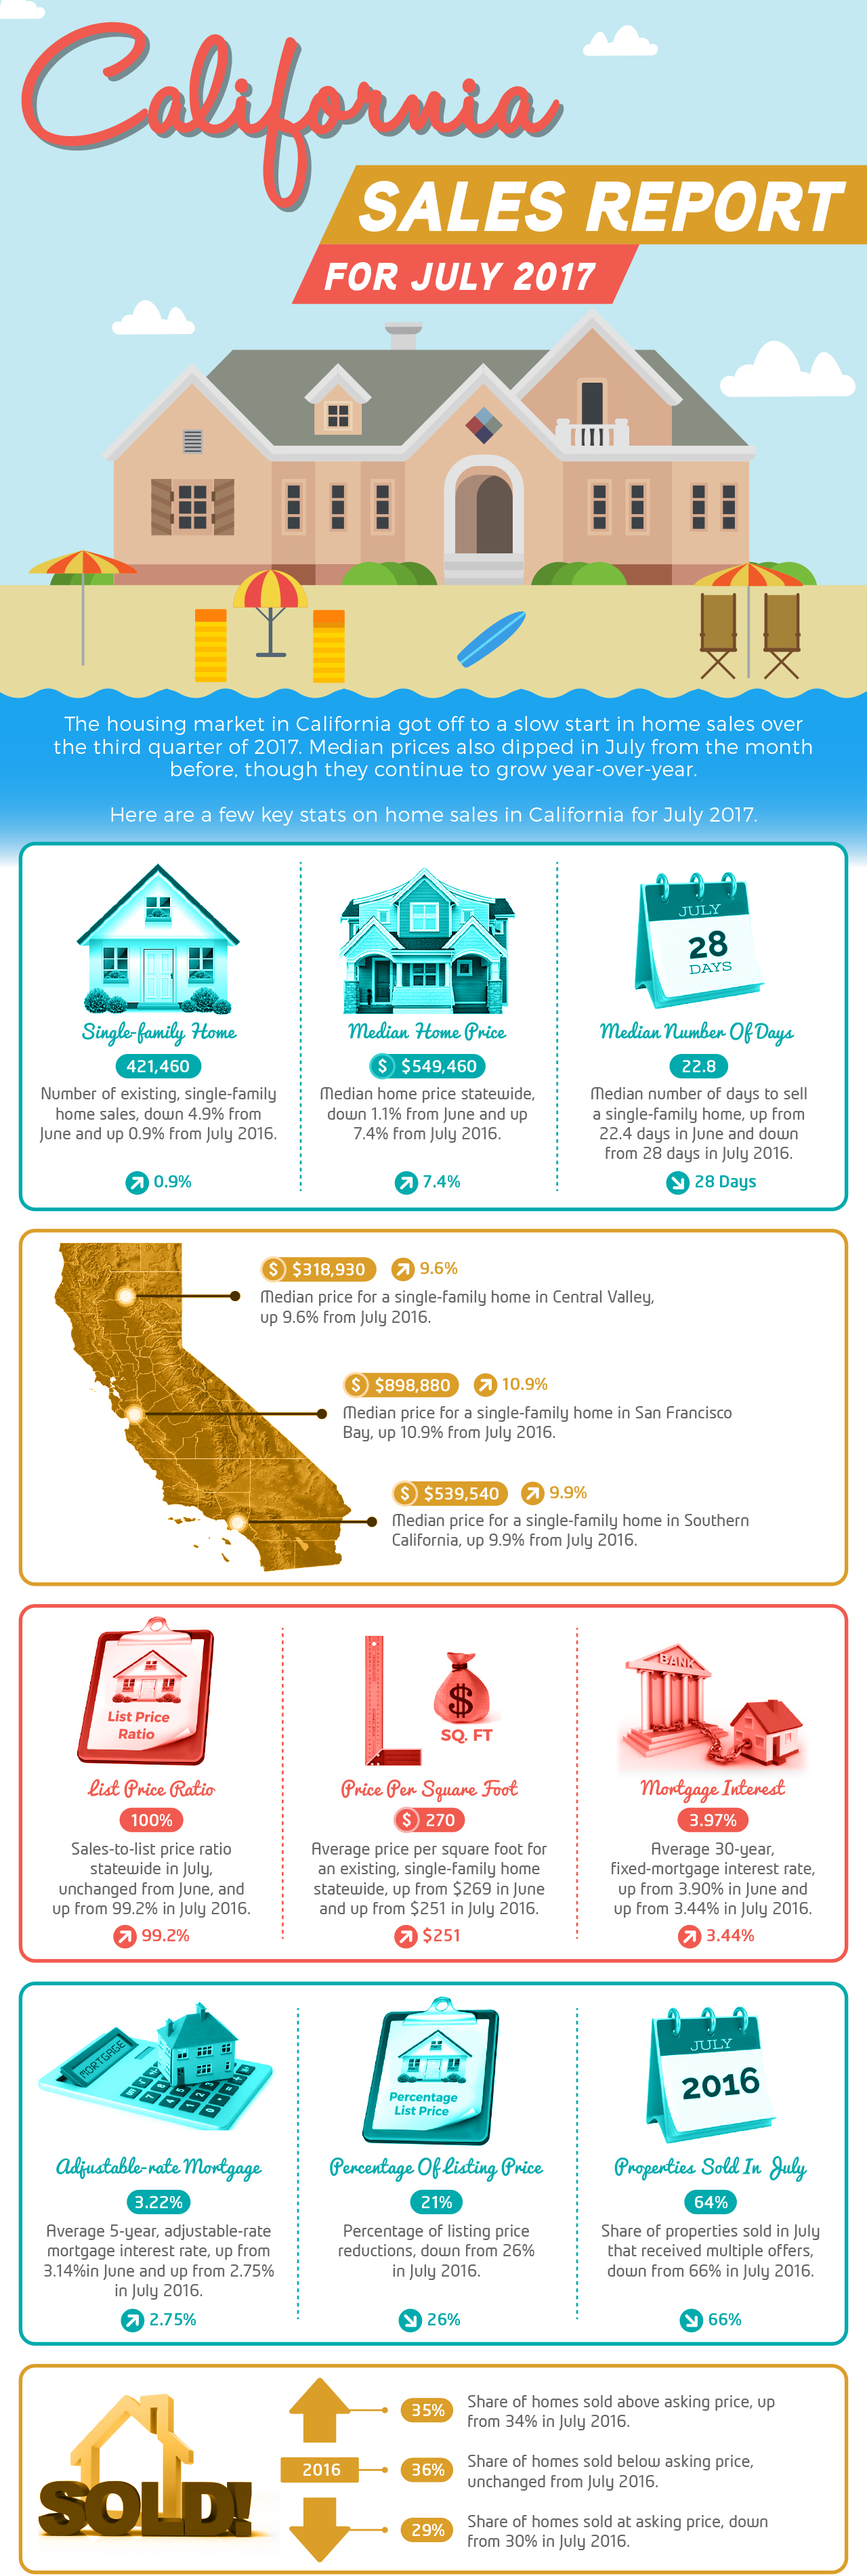 infographic-california-sales-report-for-july-2017-content